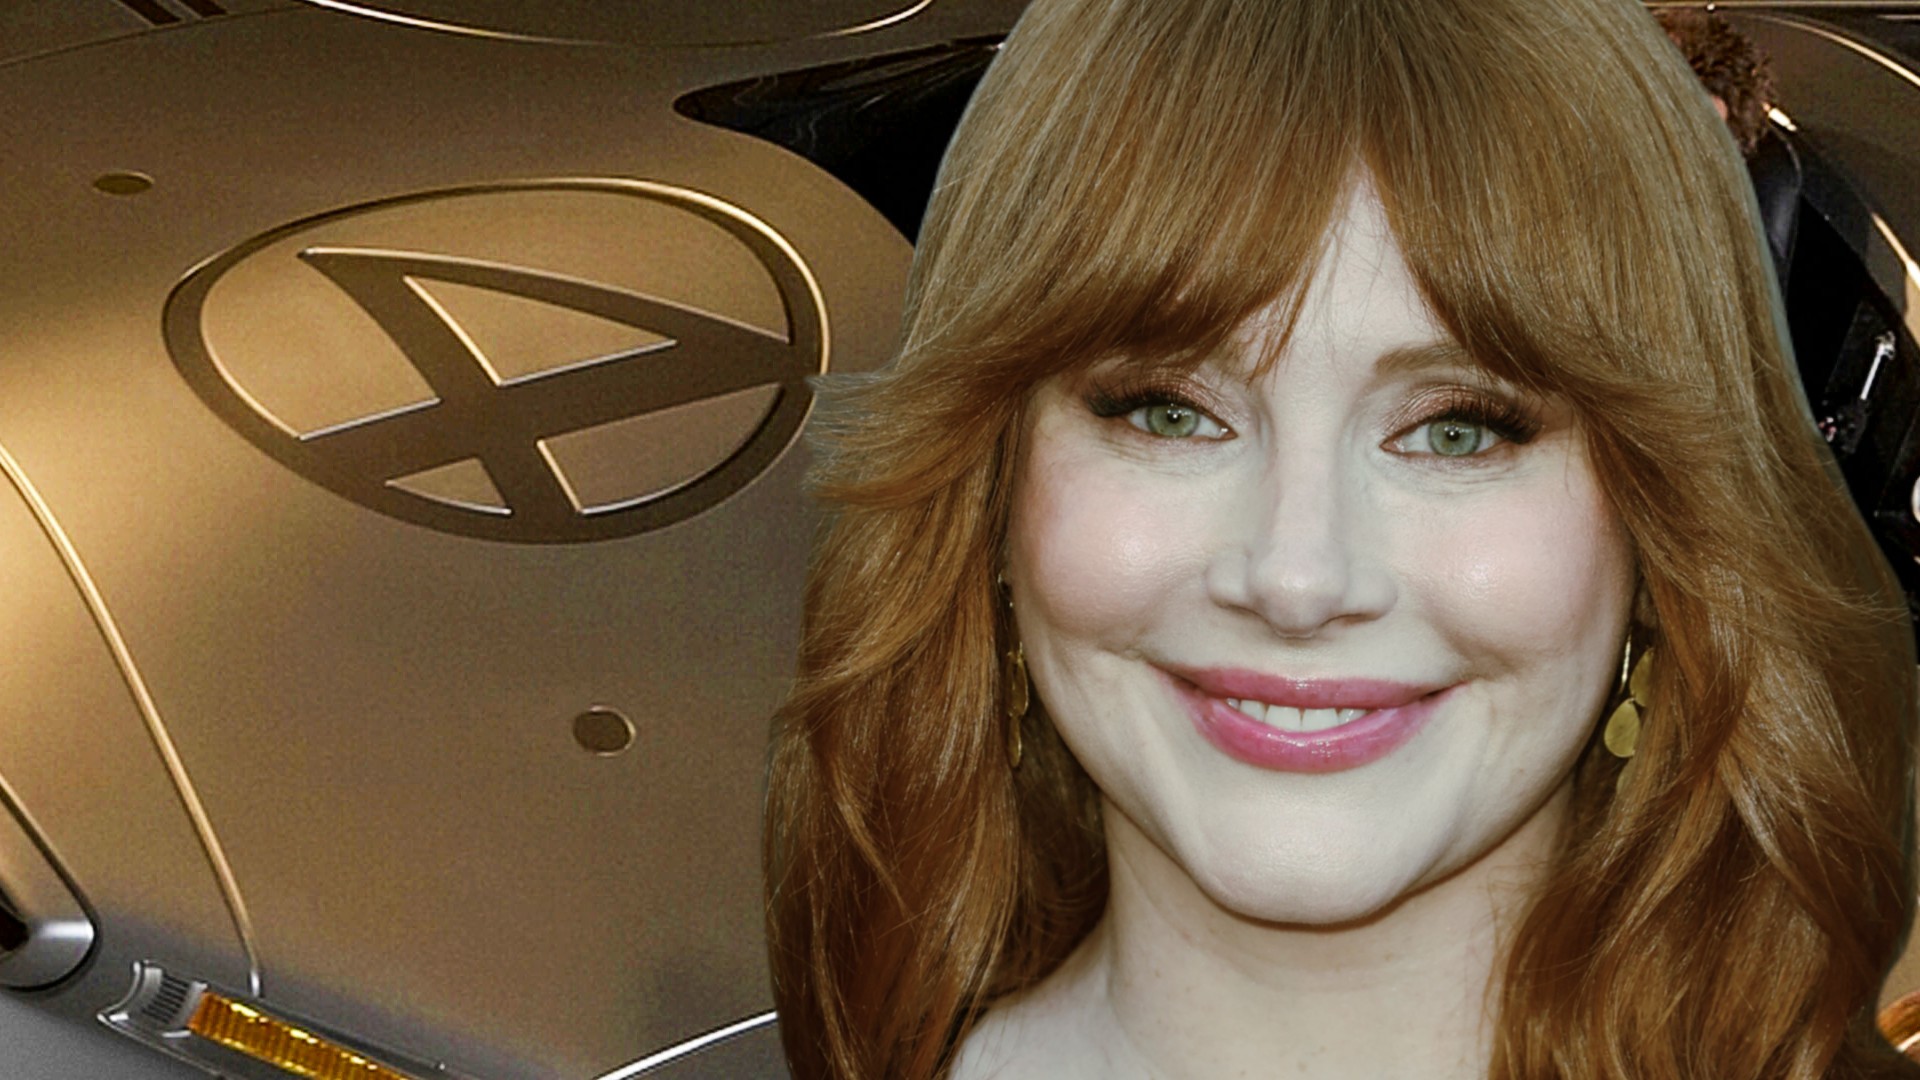 Fantastic Four' Leak Explained: Will Bryce Dallas Howard Direct?